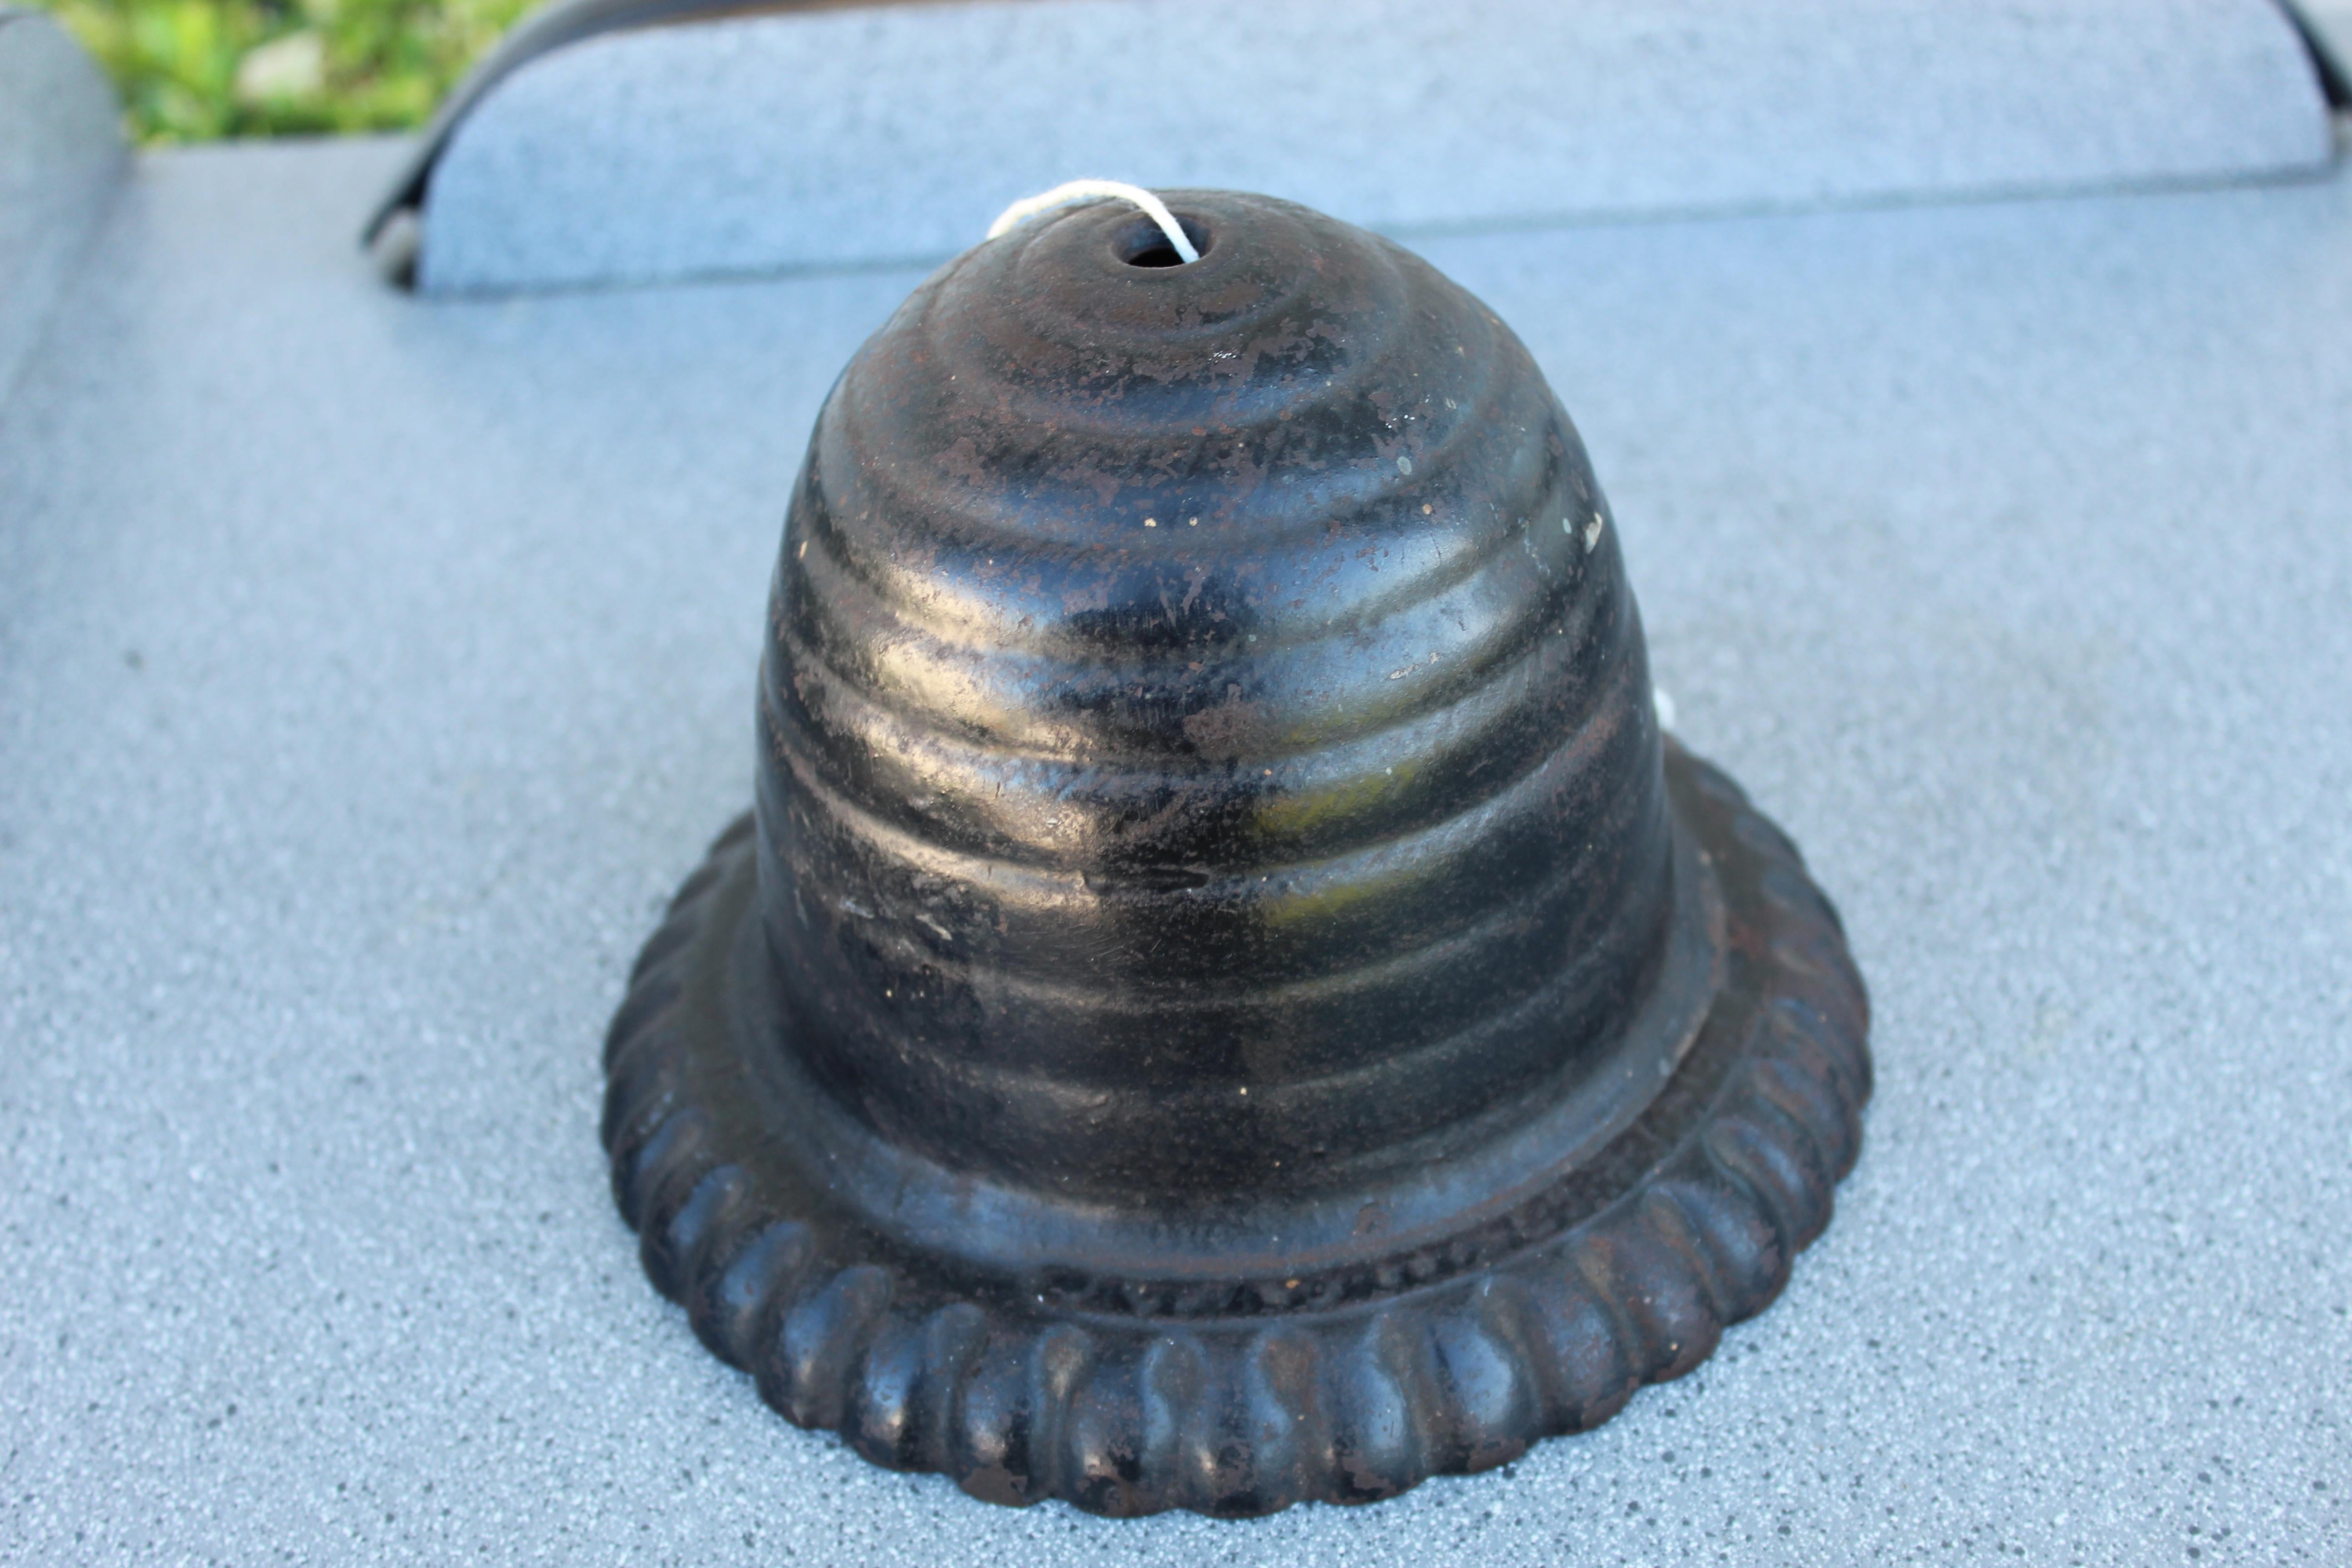 Antique cast iron bee hive string holder. This is a very old cast iron string holder that is in very nice condition.
It has its original bottom twist door. This is a very usable old string holder. Mostly used in the 19th century general